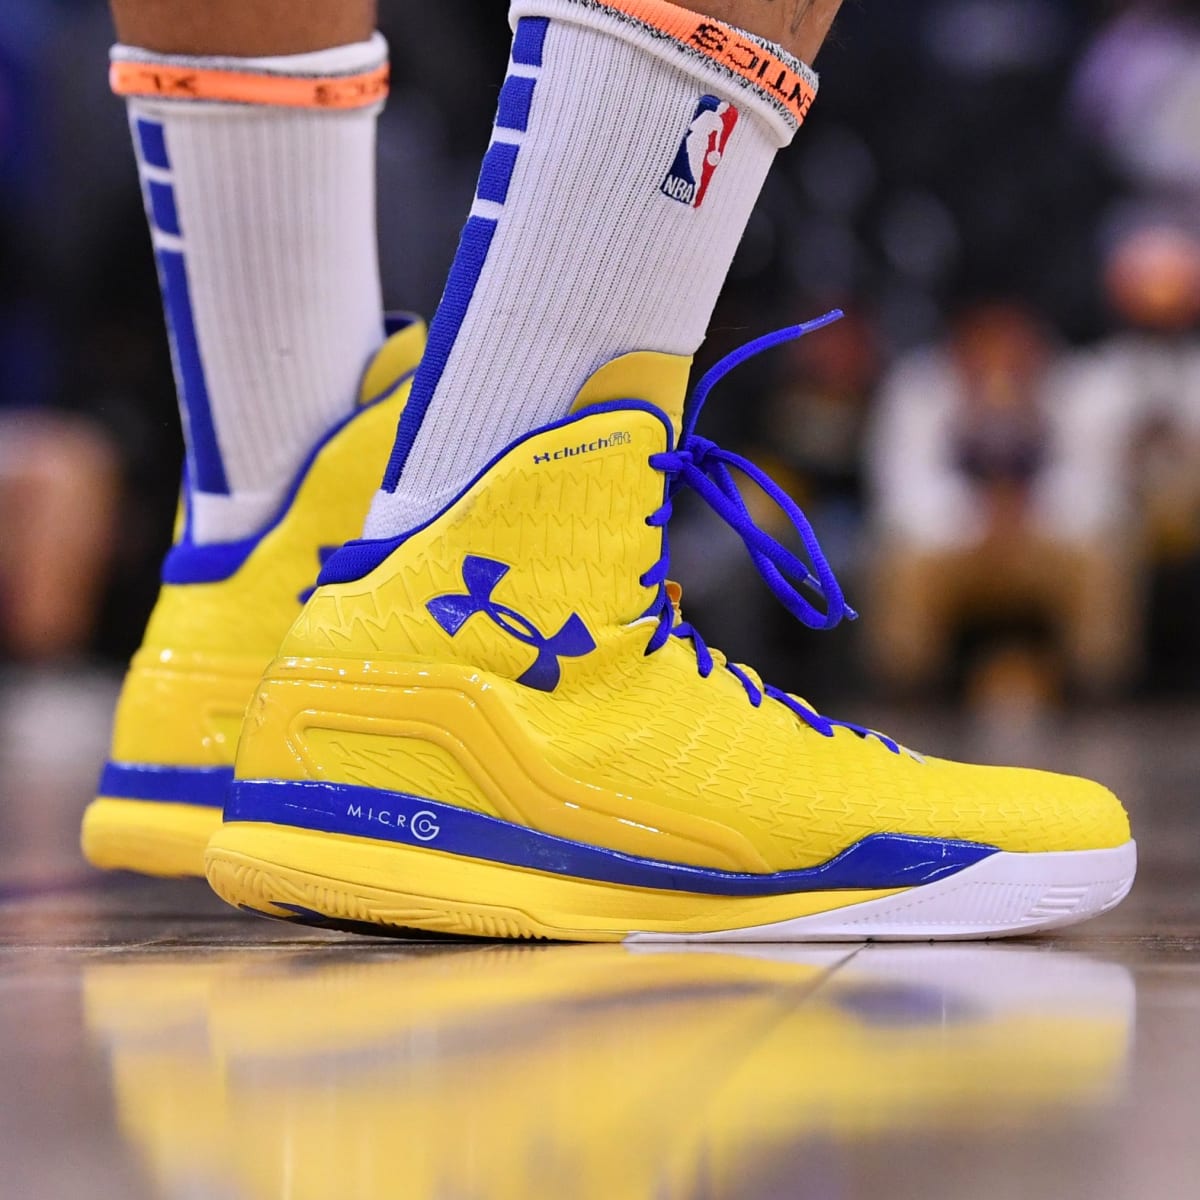 Stephen Curry Shoes 37 | peacecommission.kdsg.gov.ng